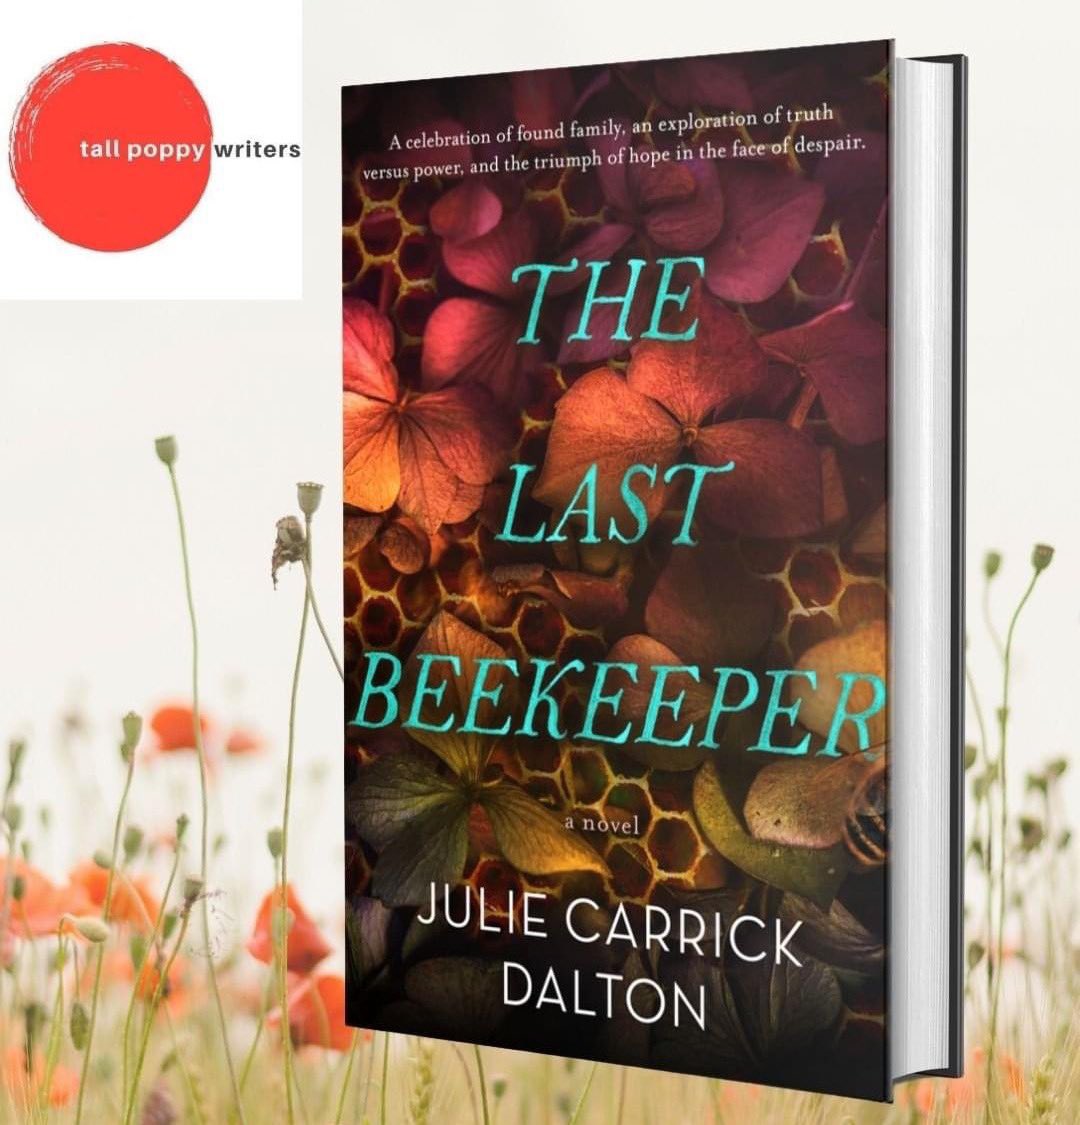 HAPPY PUB DAY @juliecardalt!!! 

🐝THE LAST BEEKEEPER
is a celebration of found family, an exploration of truth versus power, and the triumph of hope in the face of despair.
#juliecarrickdalton #thelastbeekeeper #tallpoppywriters